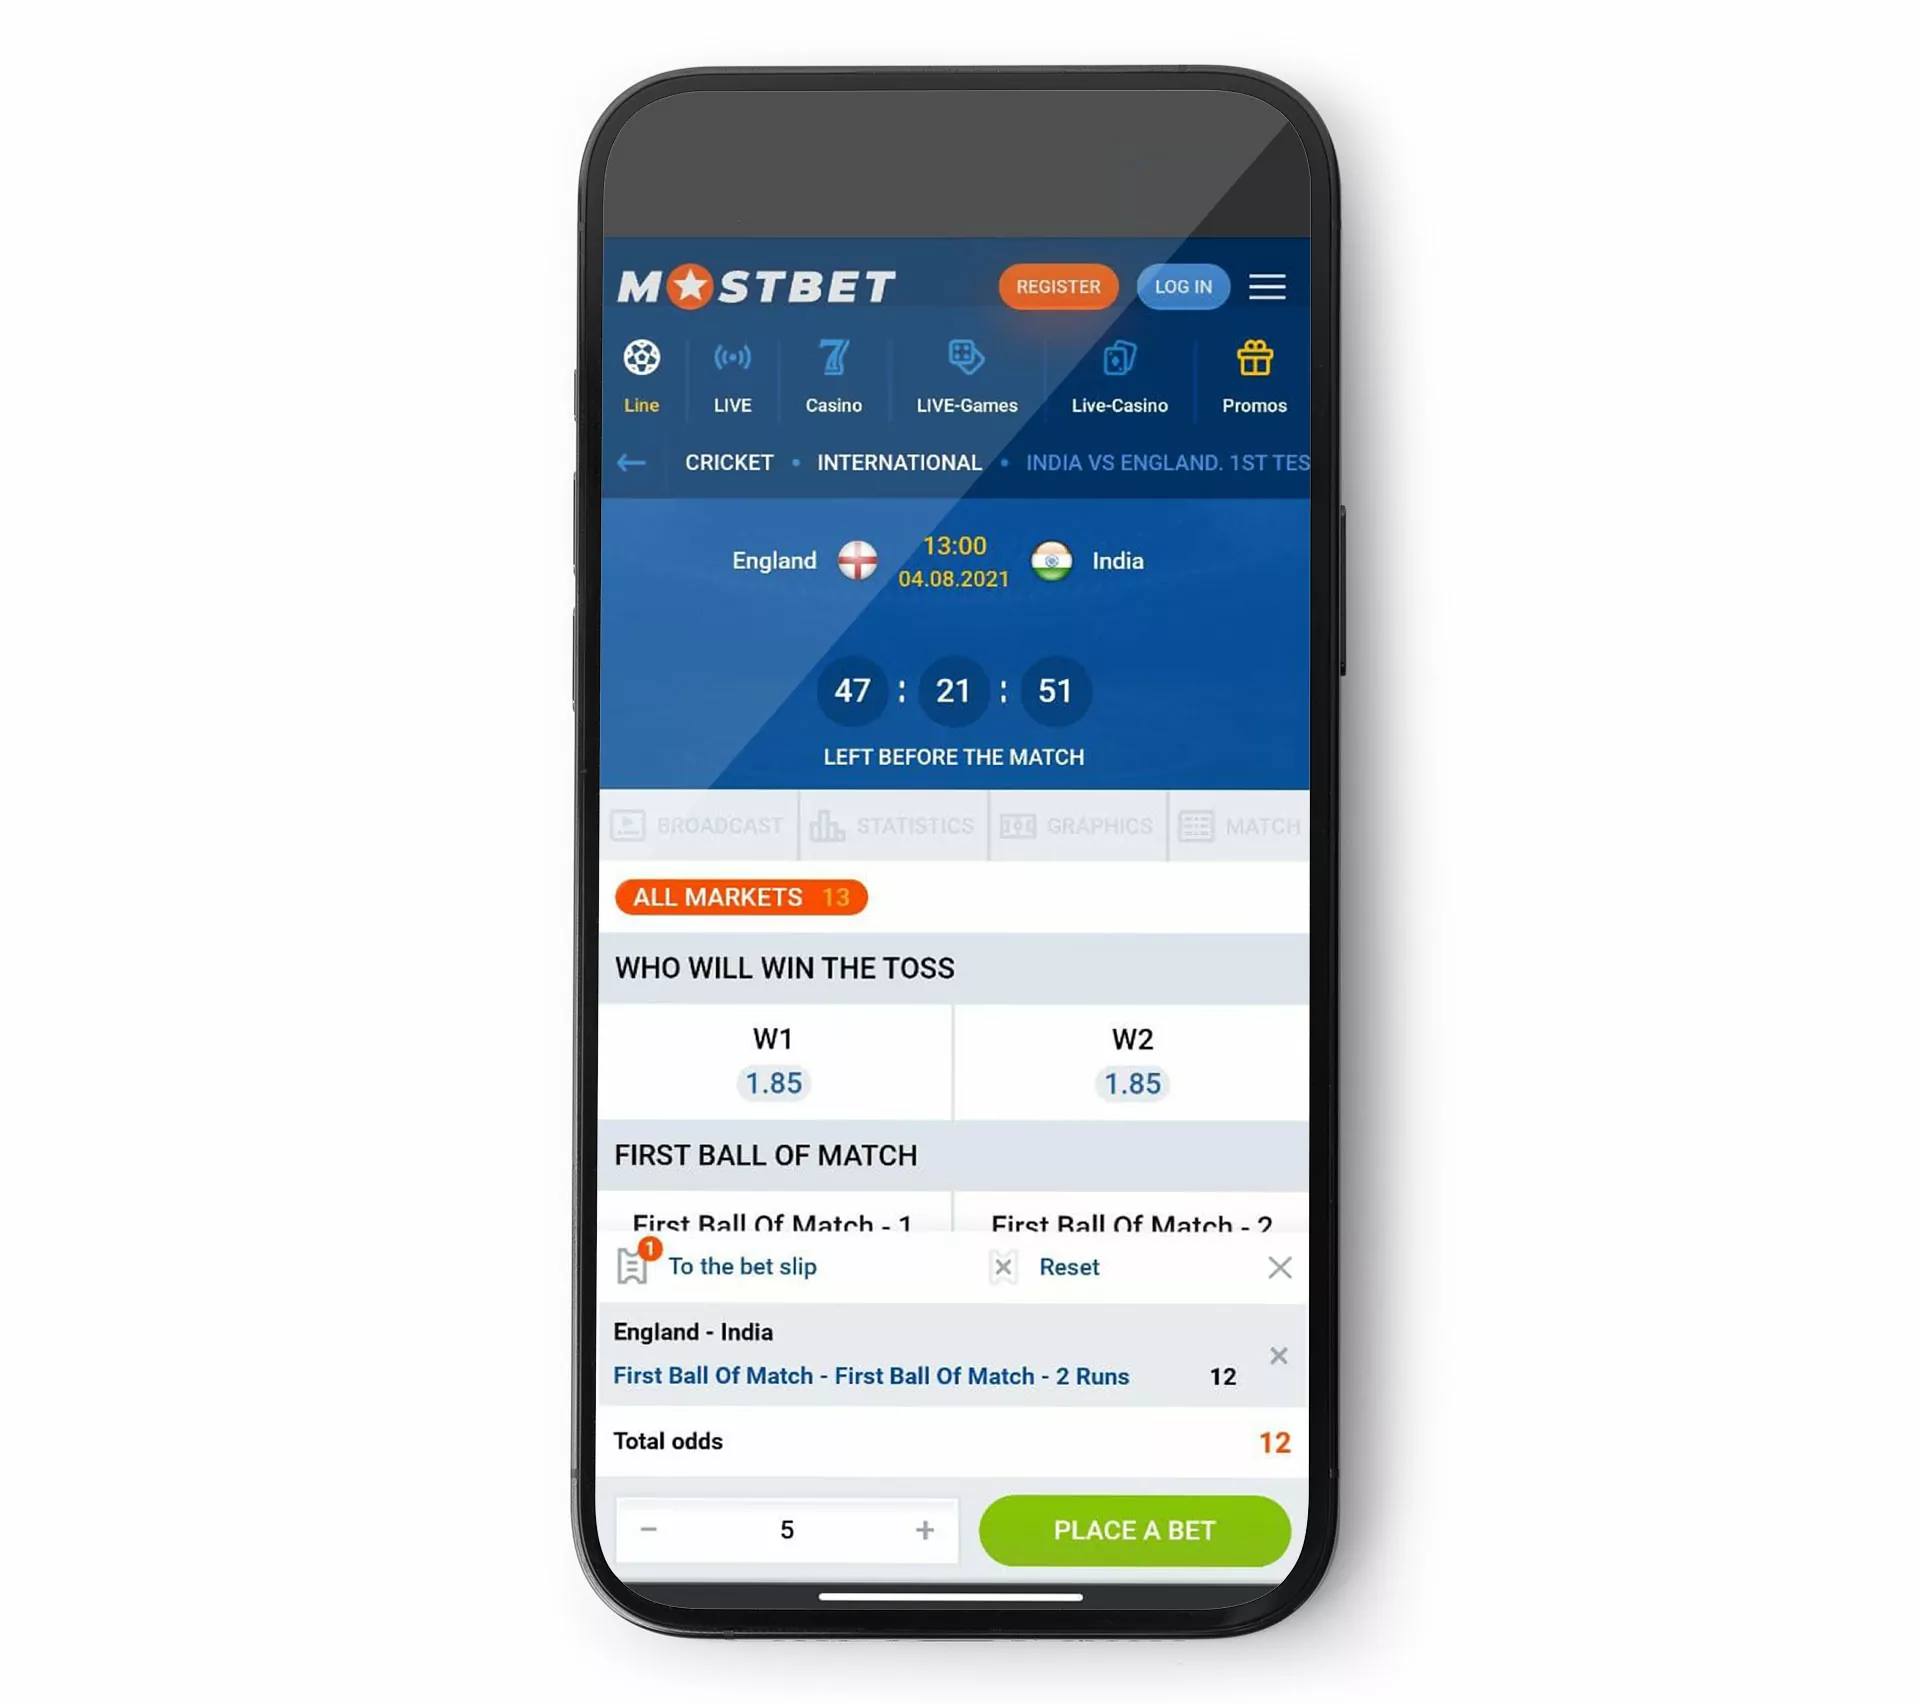 Open the Mostbet site on your iPhone.